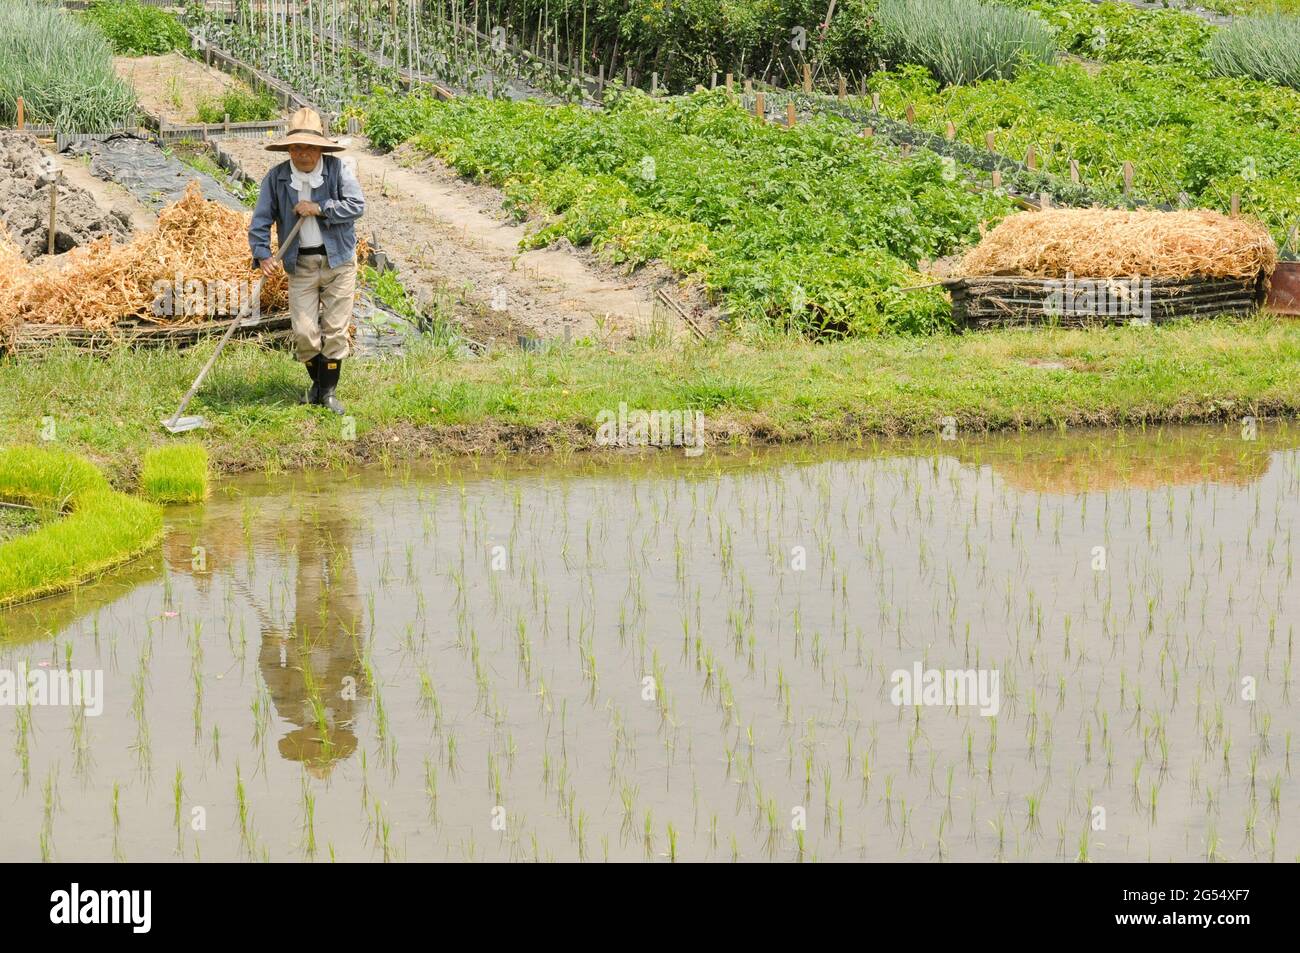 Farmer and rice plantations on a small town near the train line Stock Photo